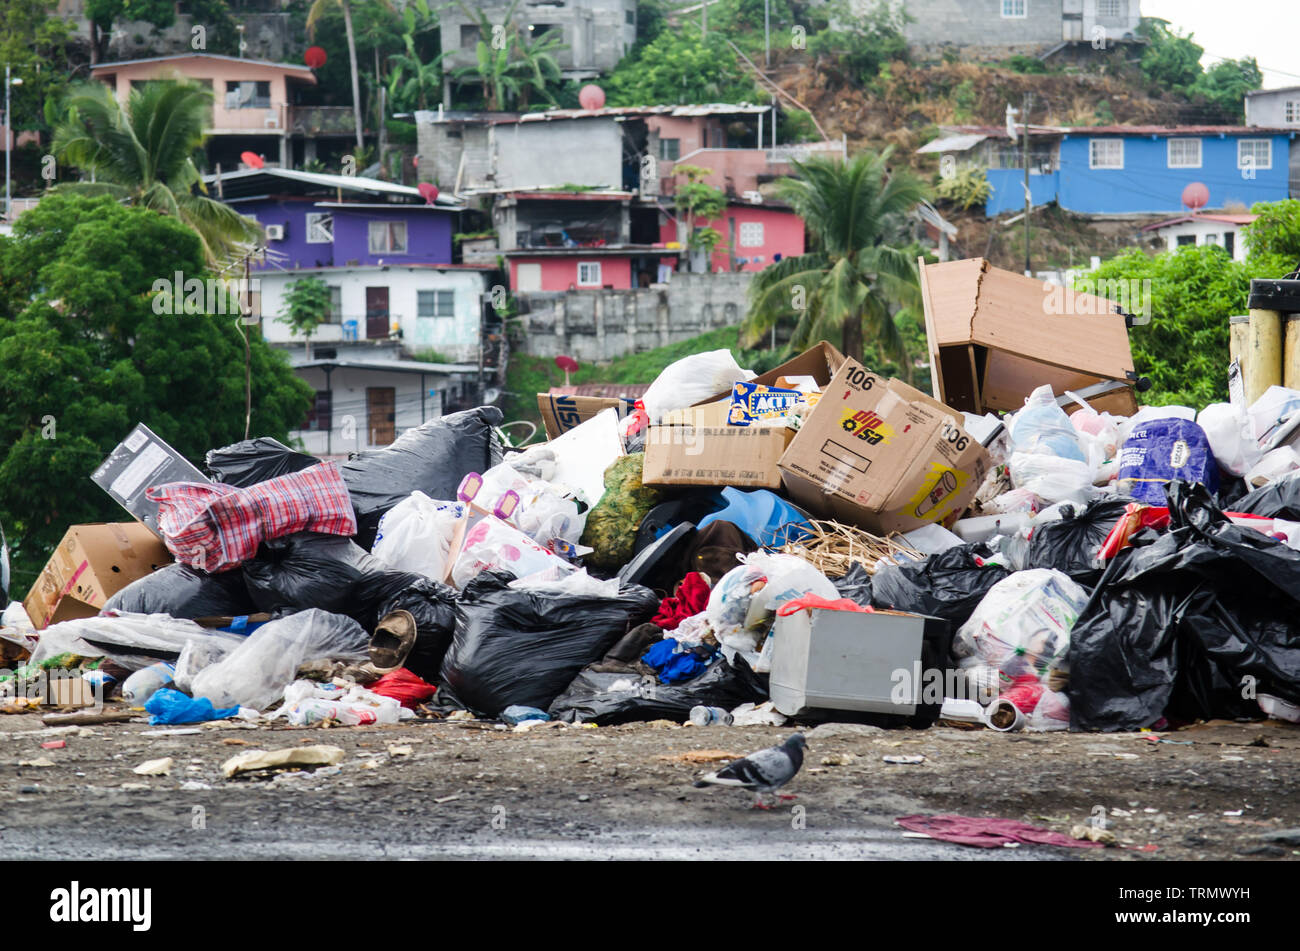 Hills of accumulated trash evidence the problems in the waste disposal system in Panama City outskirts. Stock Photo